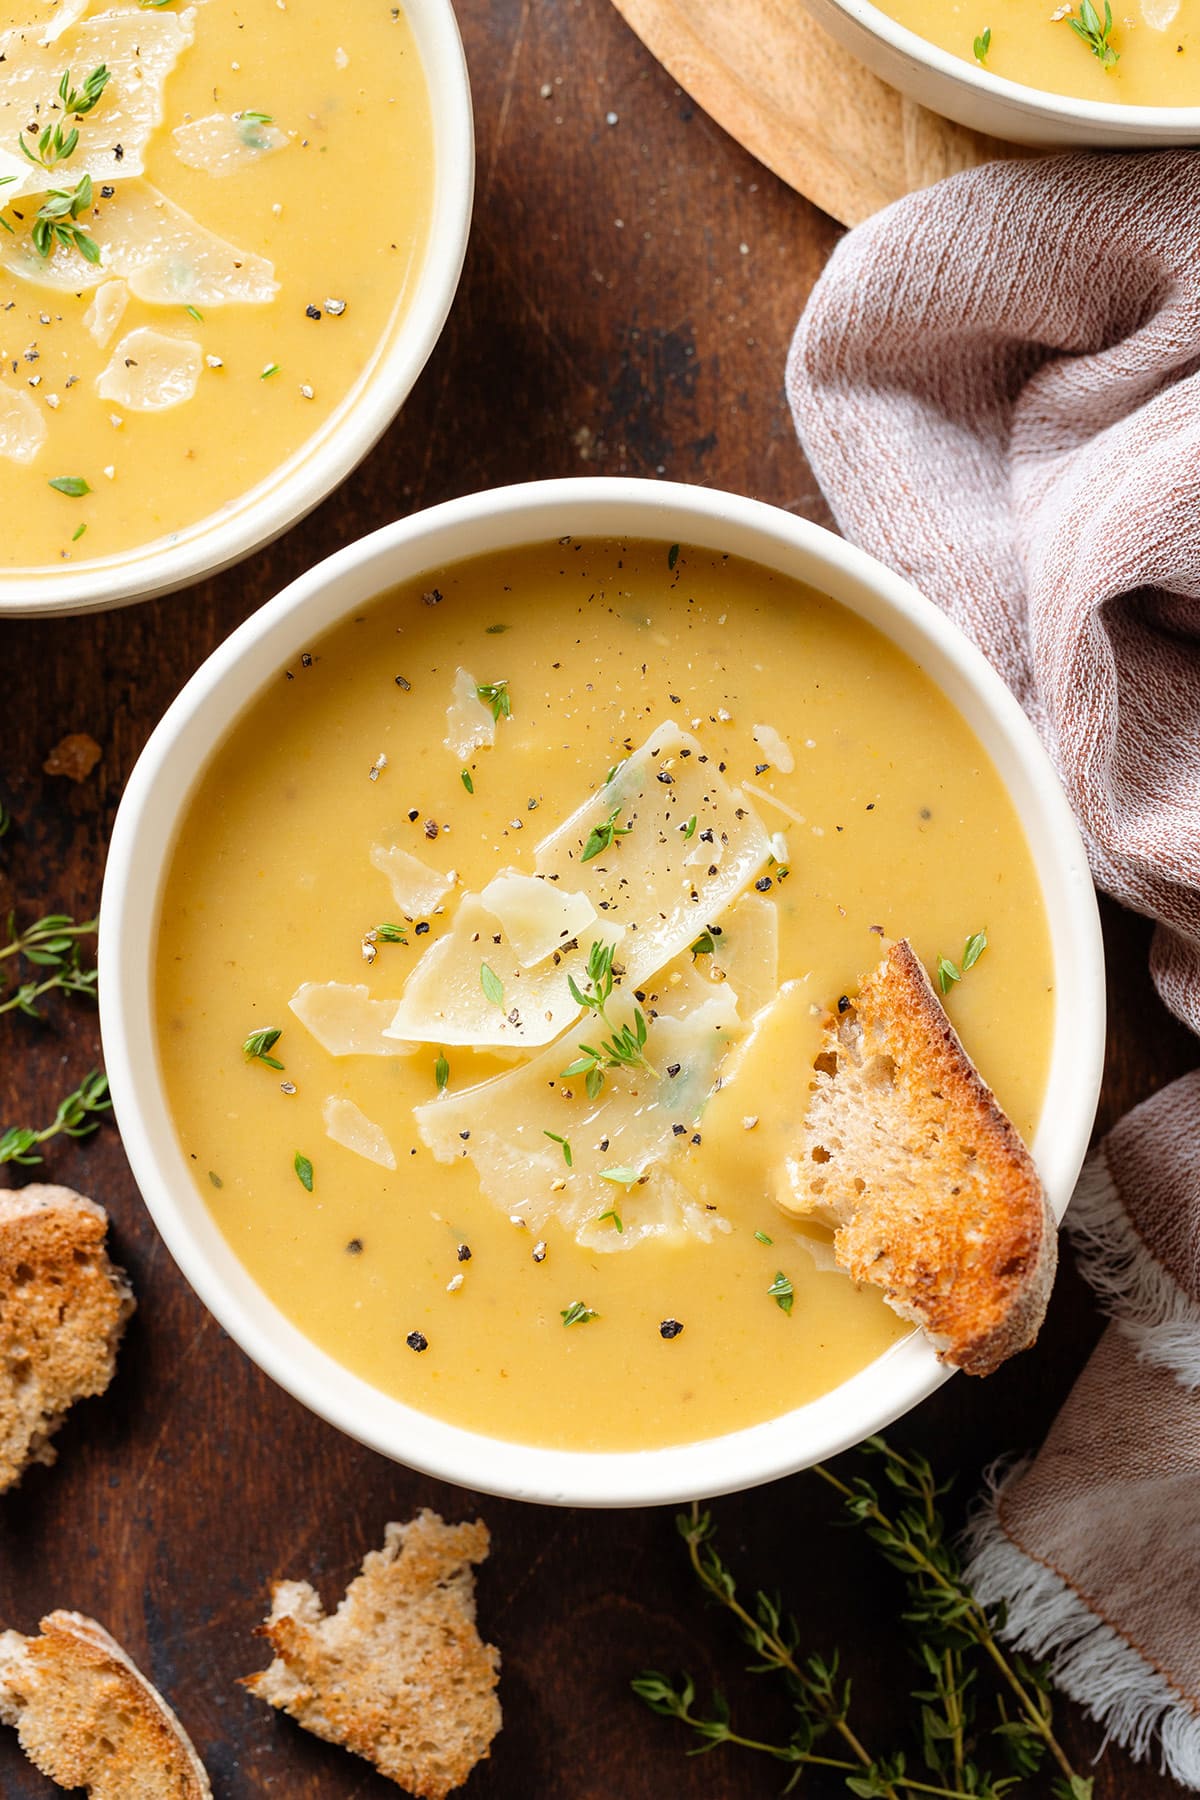 Light yellow potato soup in a white bowl garnished with parmesan slices, black pepper, fresh thyme, and toasted bread dipped into the soup.